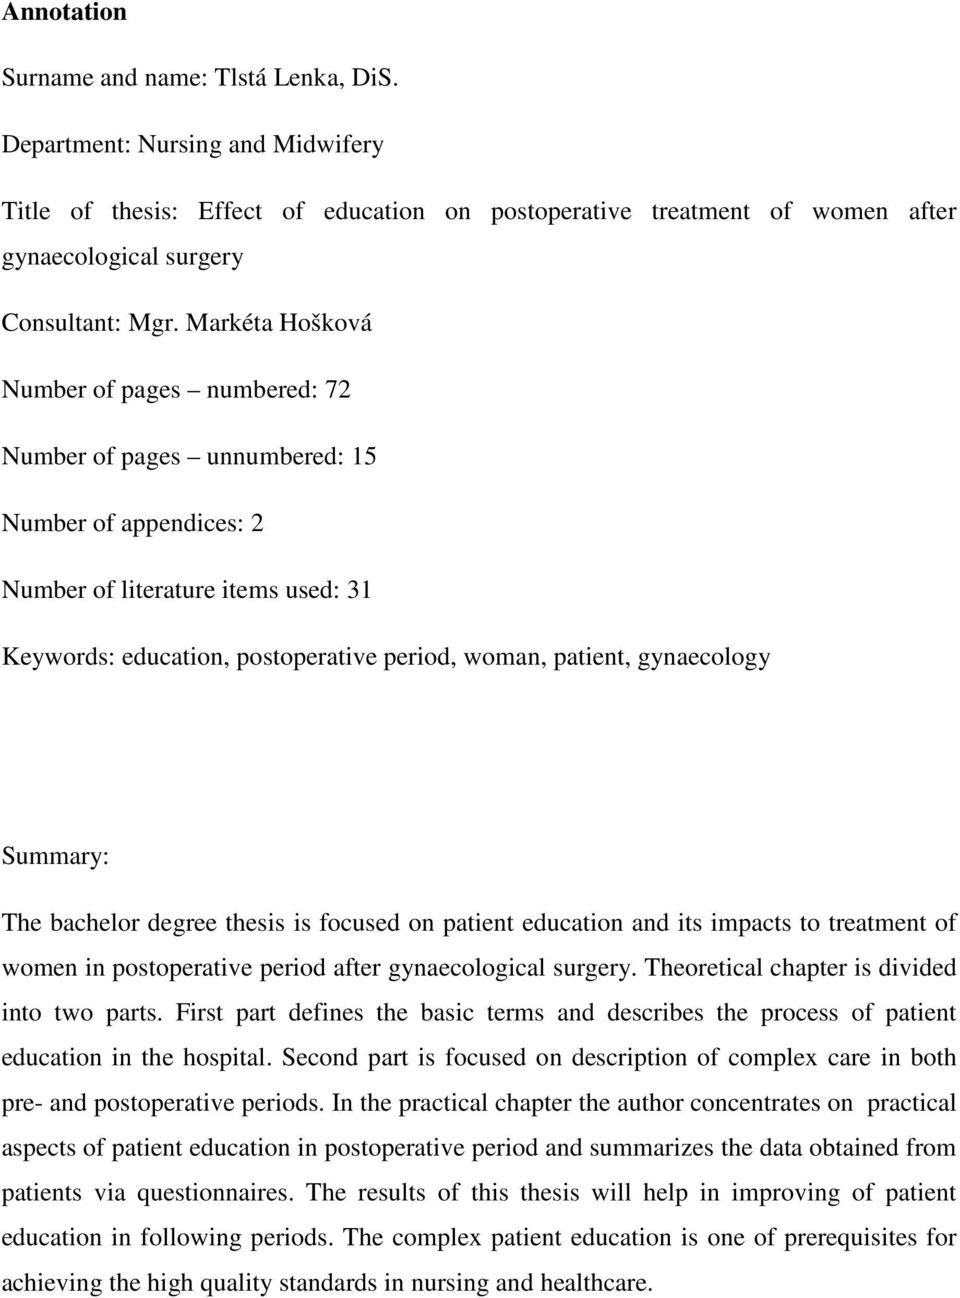 gynaecology Summary: The bachelor degree thesis is focused on patient education and its impacts to treatment of women in postoperative period after gynaecological surgery.